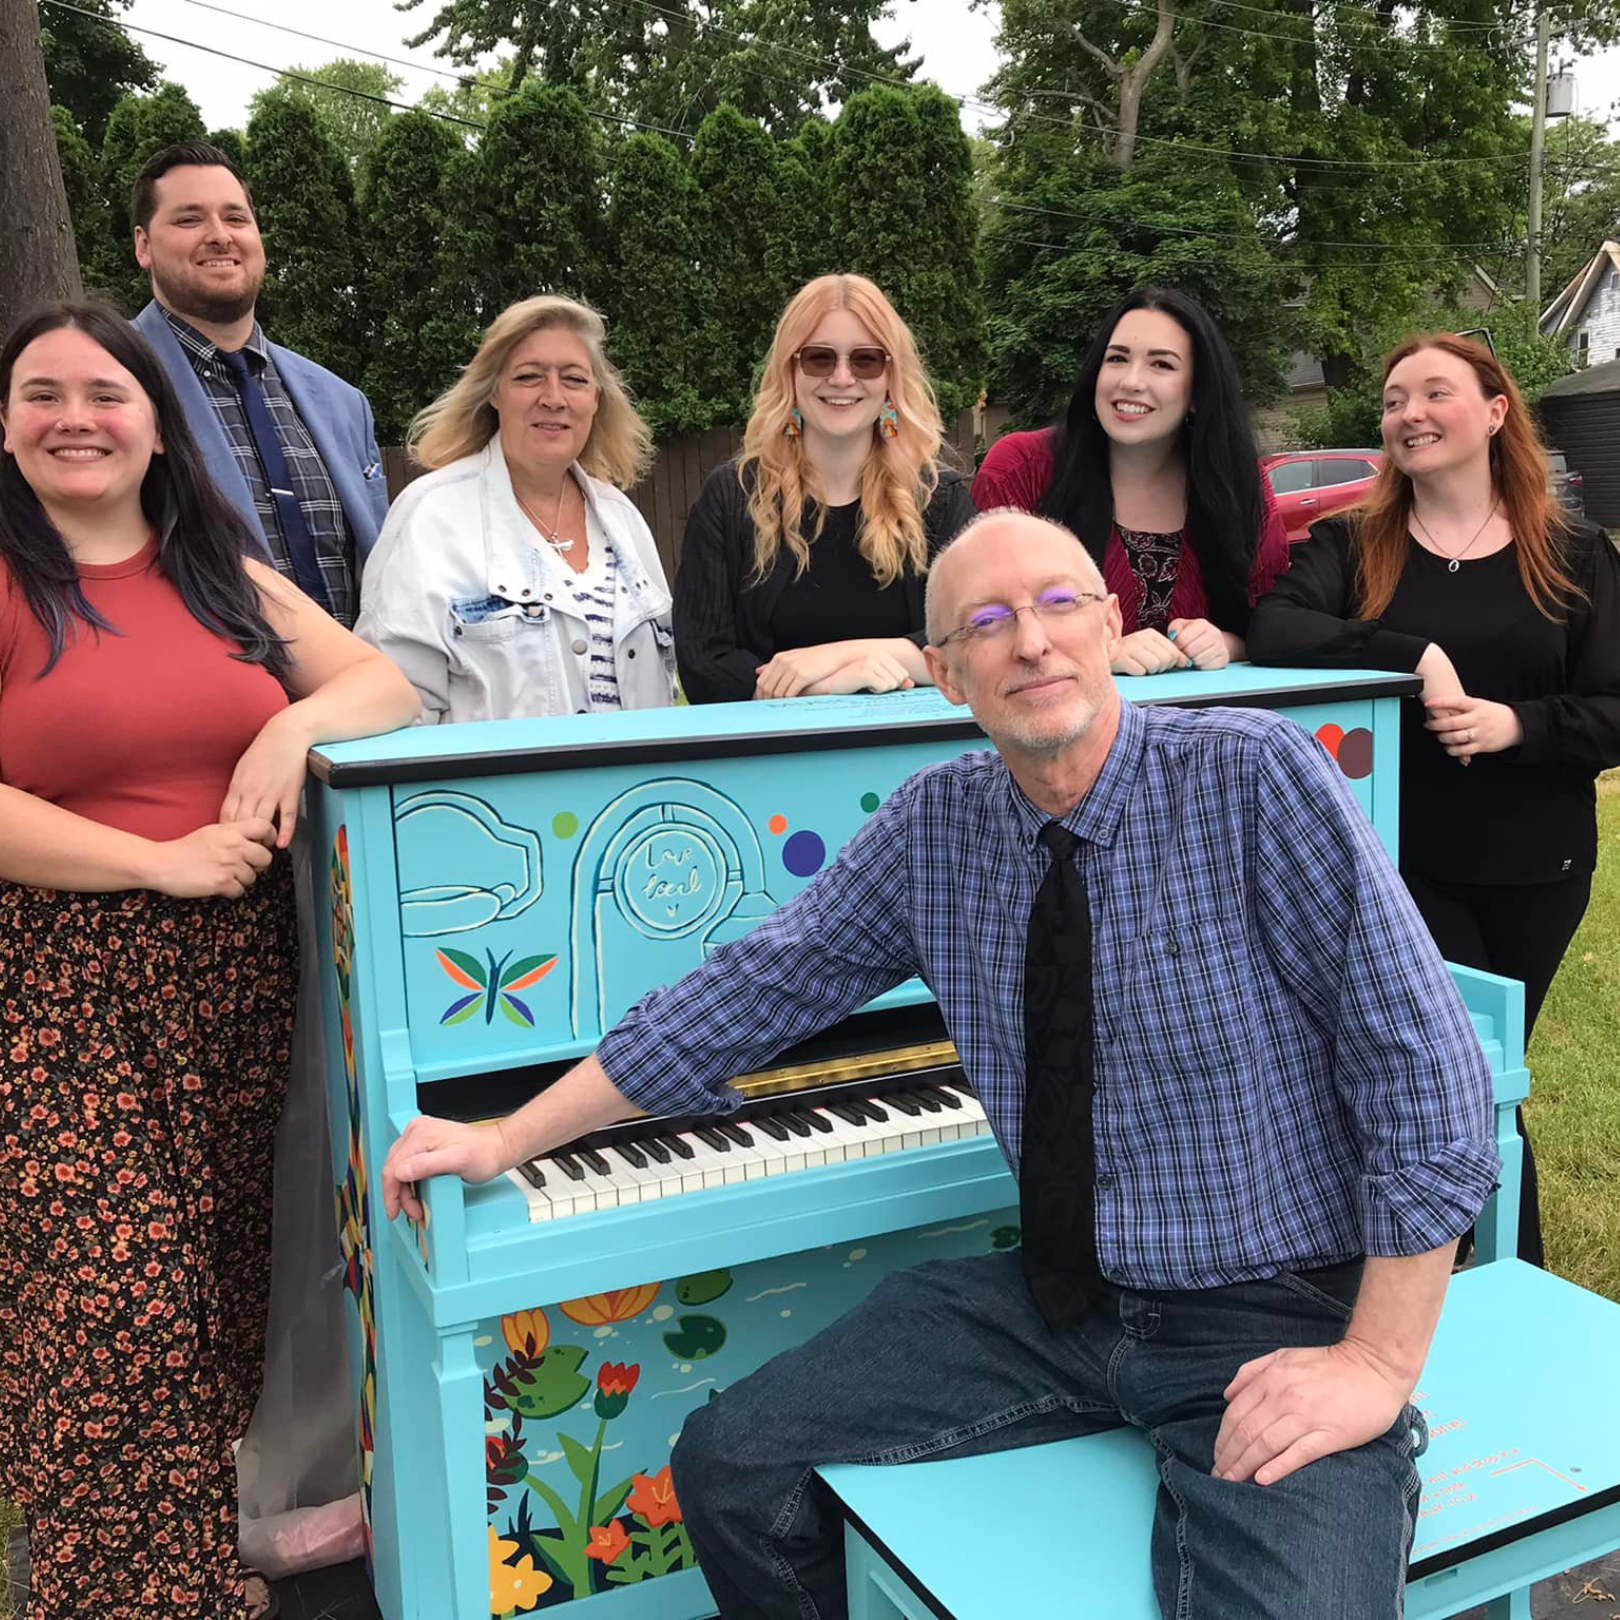 The Piano Place Donates The Famous "Street Piano"